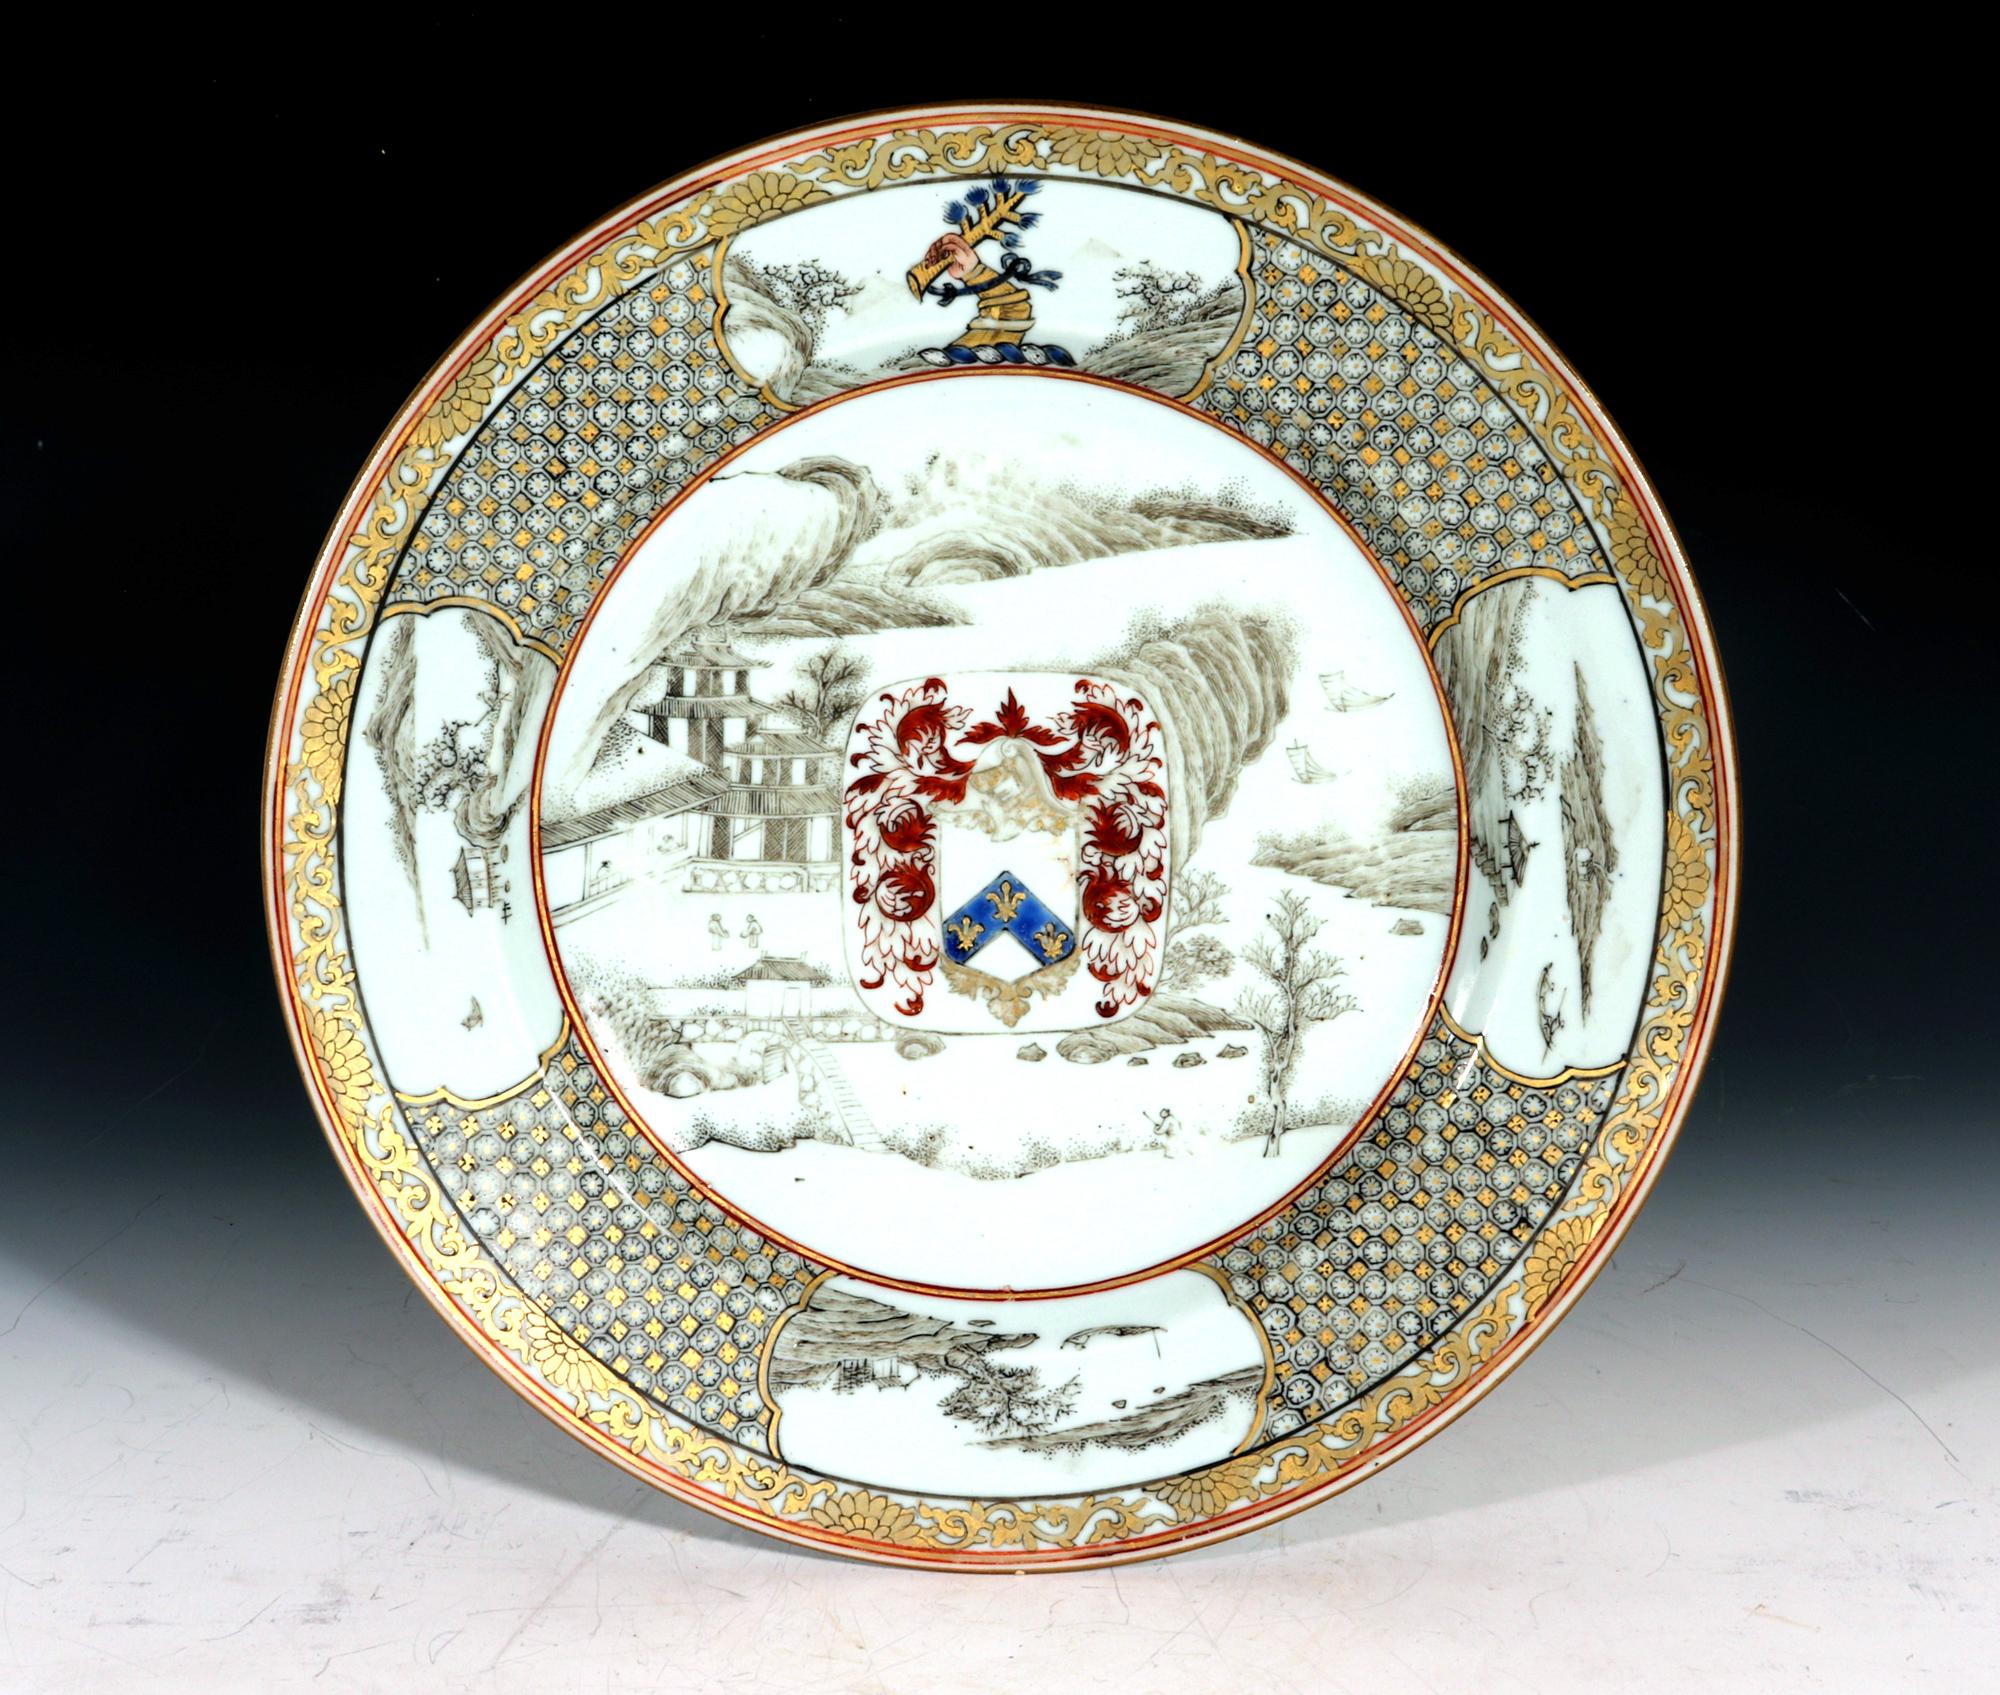 Early 18th Century Yongzheng Period Chinese Export Porcelain Plate,
Arms of Elwick of Middlesex,
John Elwick of Mile End in Middlesex and of Cornhill in the City of London,
Circa 1730

This rare Chinese Export armorial plate is painted with the